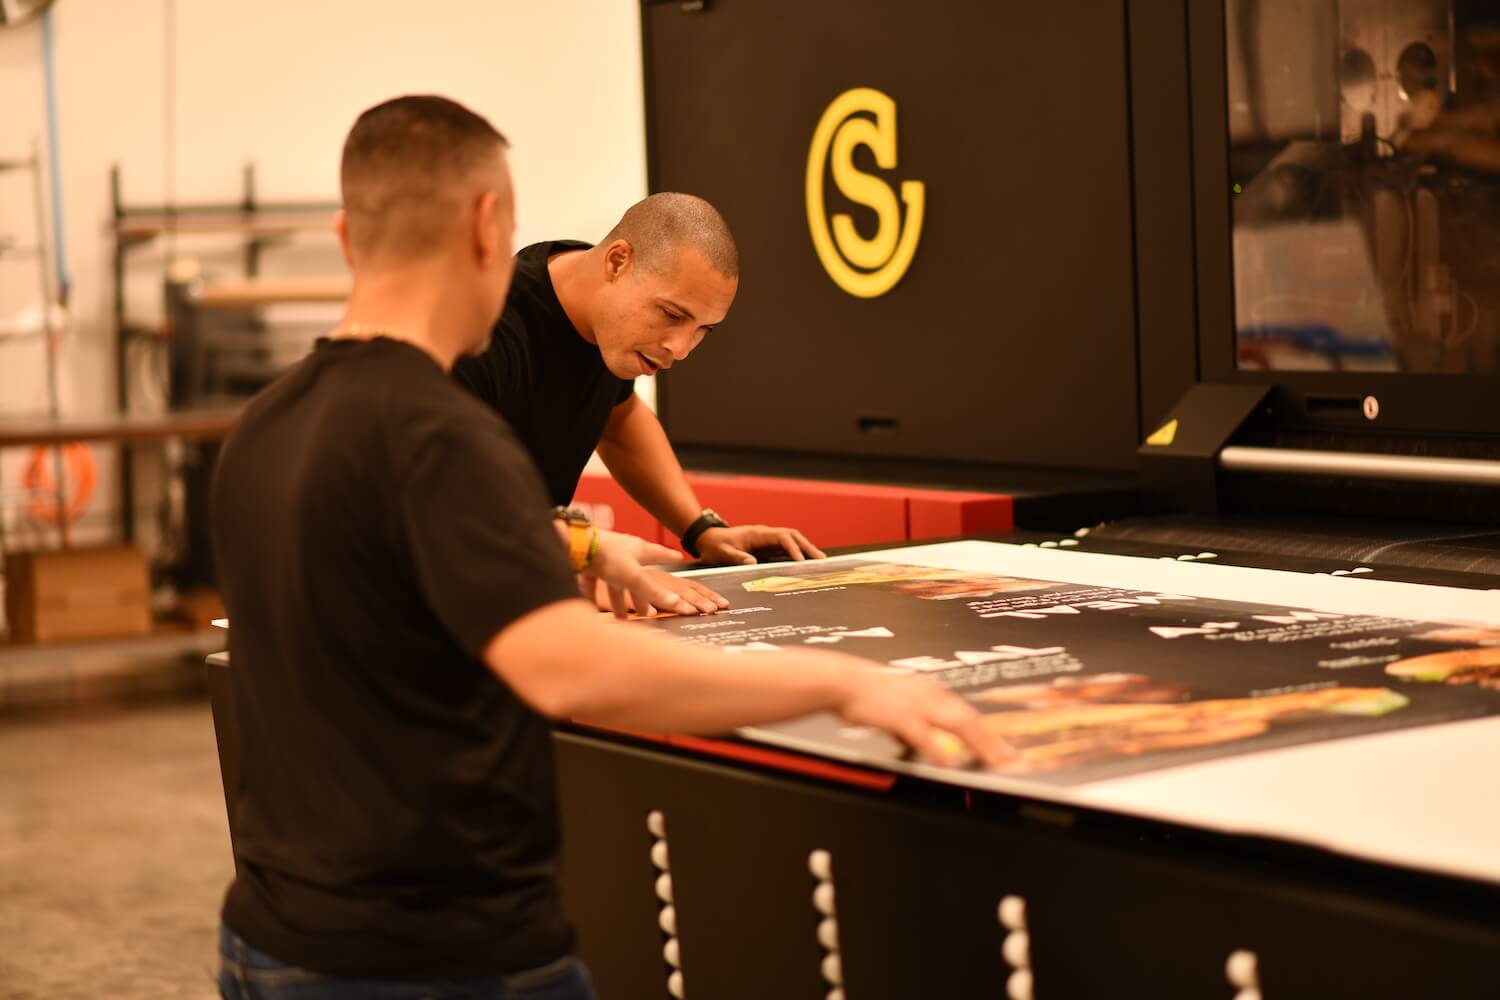 Two Southeastern employees inspecting a printed piece